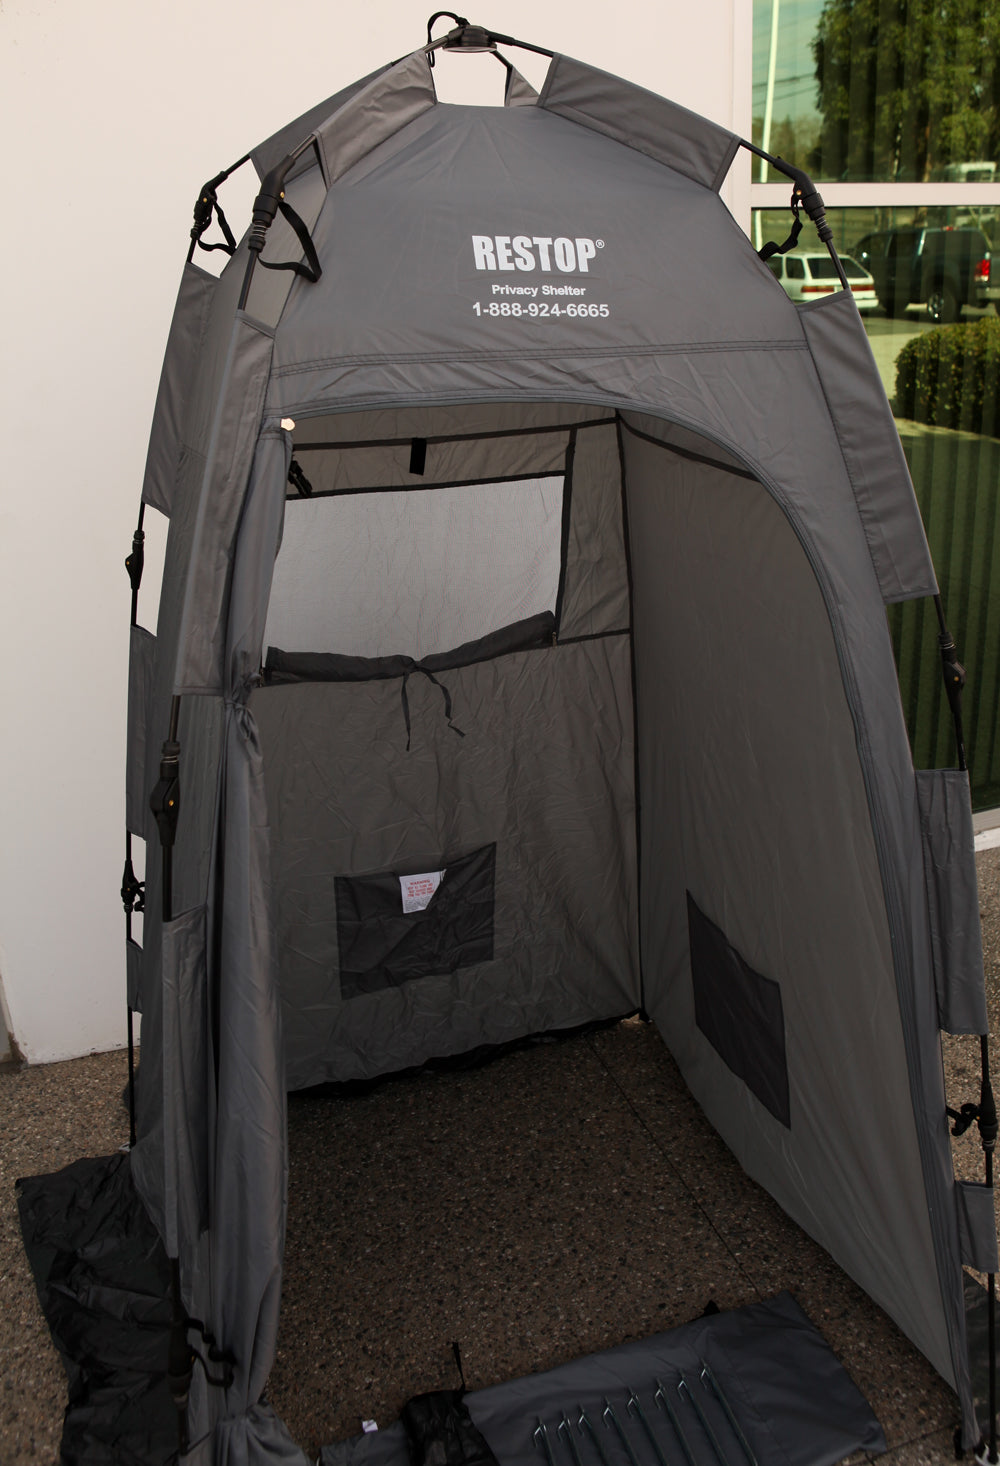 RS500 RESTOP Privacy Shelter